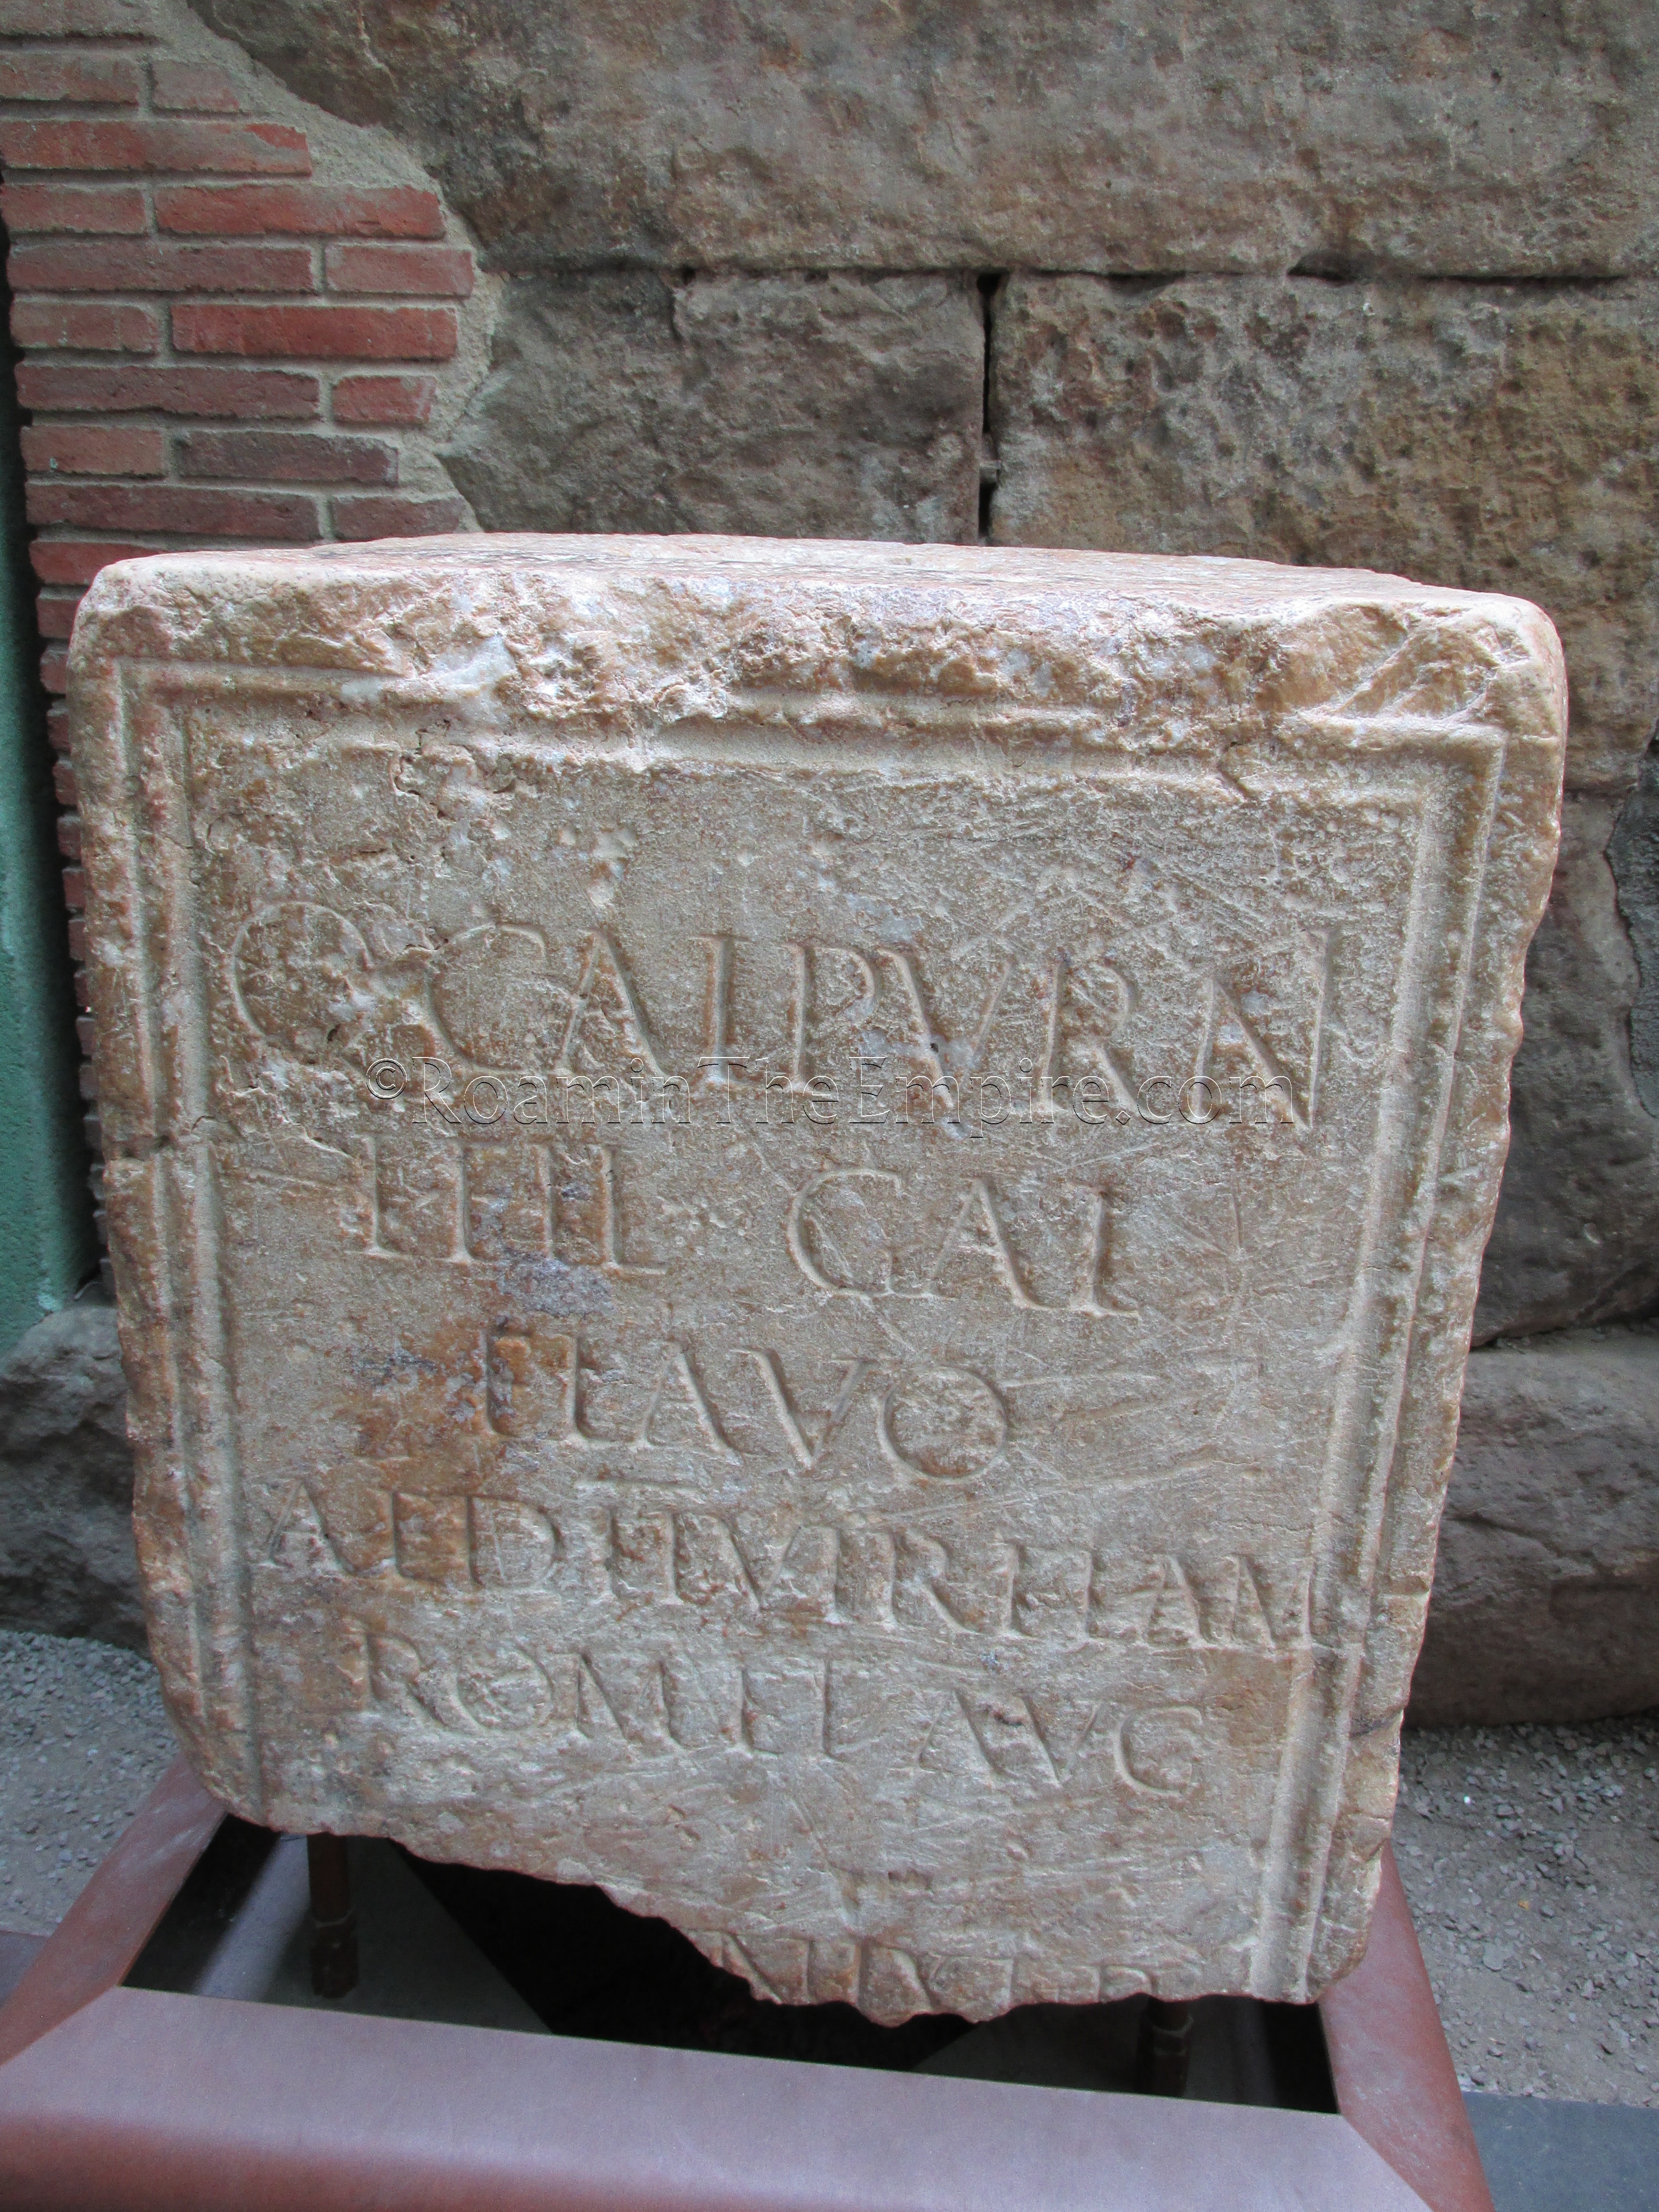 Honorary inscription of Quintus Calpurnius Flavus, a Sacerdos Augustalis, among other titles, currently displayed in the courtyard of the Temple of Augustus, originally from the forum.